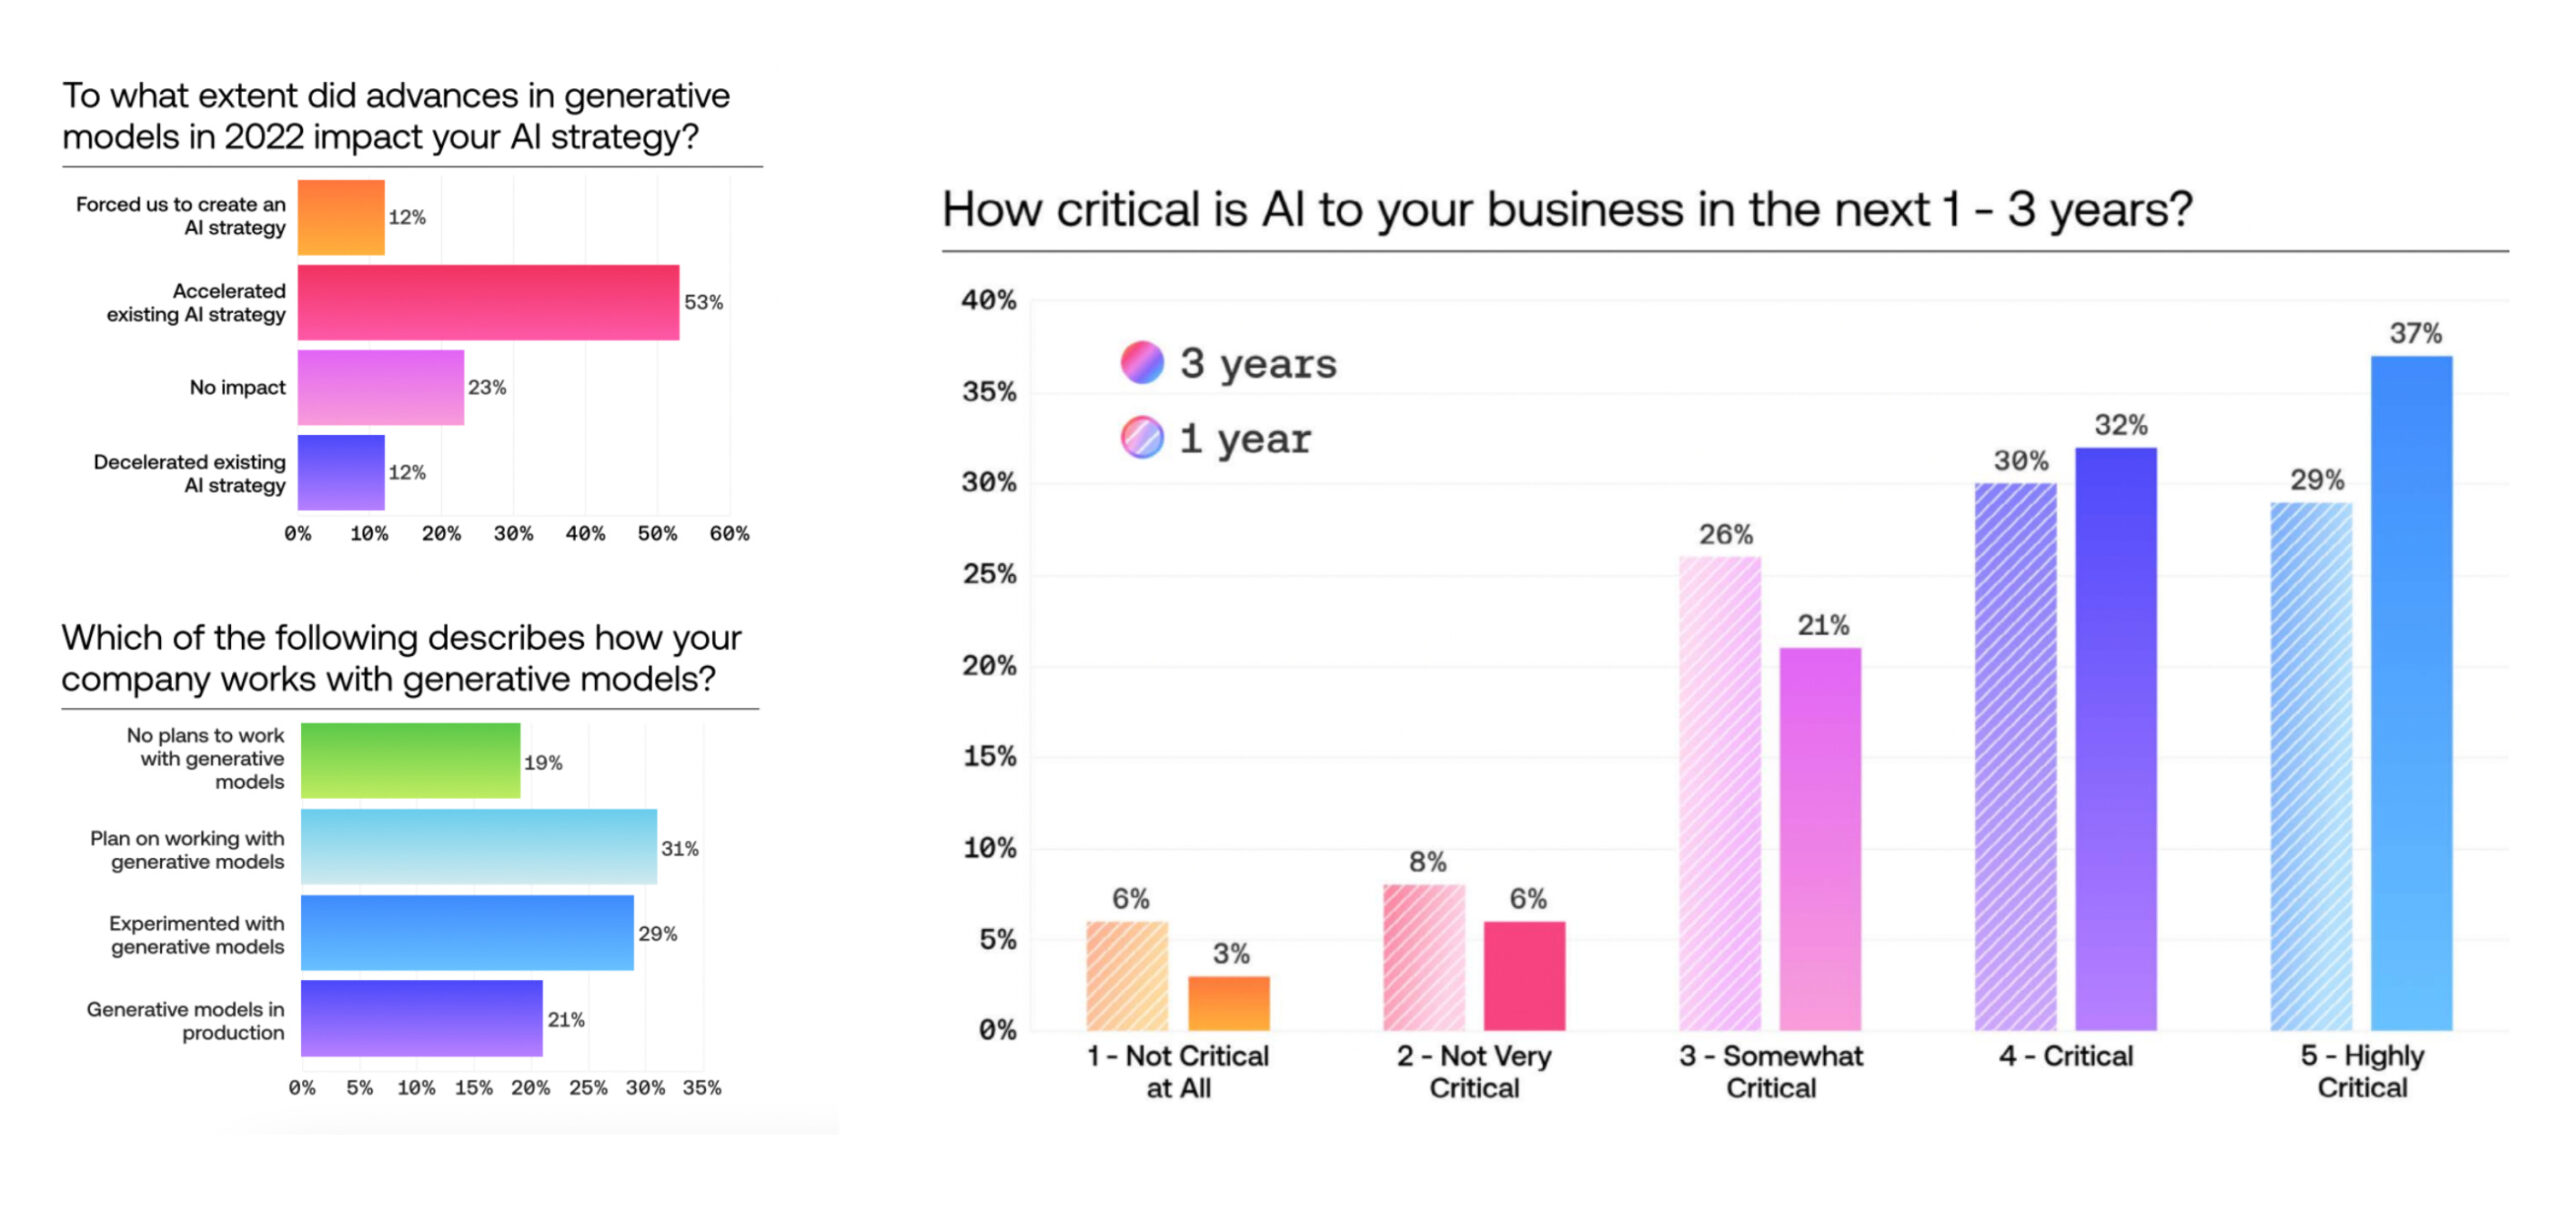 3 graphs; entitled "to what extent did advances in generative models in 2022 impact your AI strategy?", "Which of the following describes how your company works with generative models" and "How critical is AI to your business in the next 1 - 3 years"